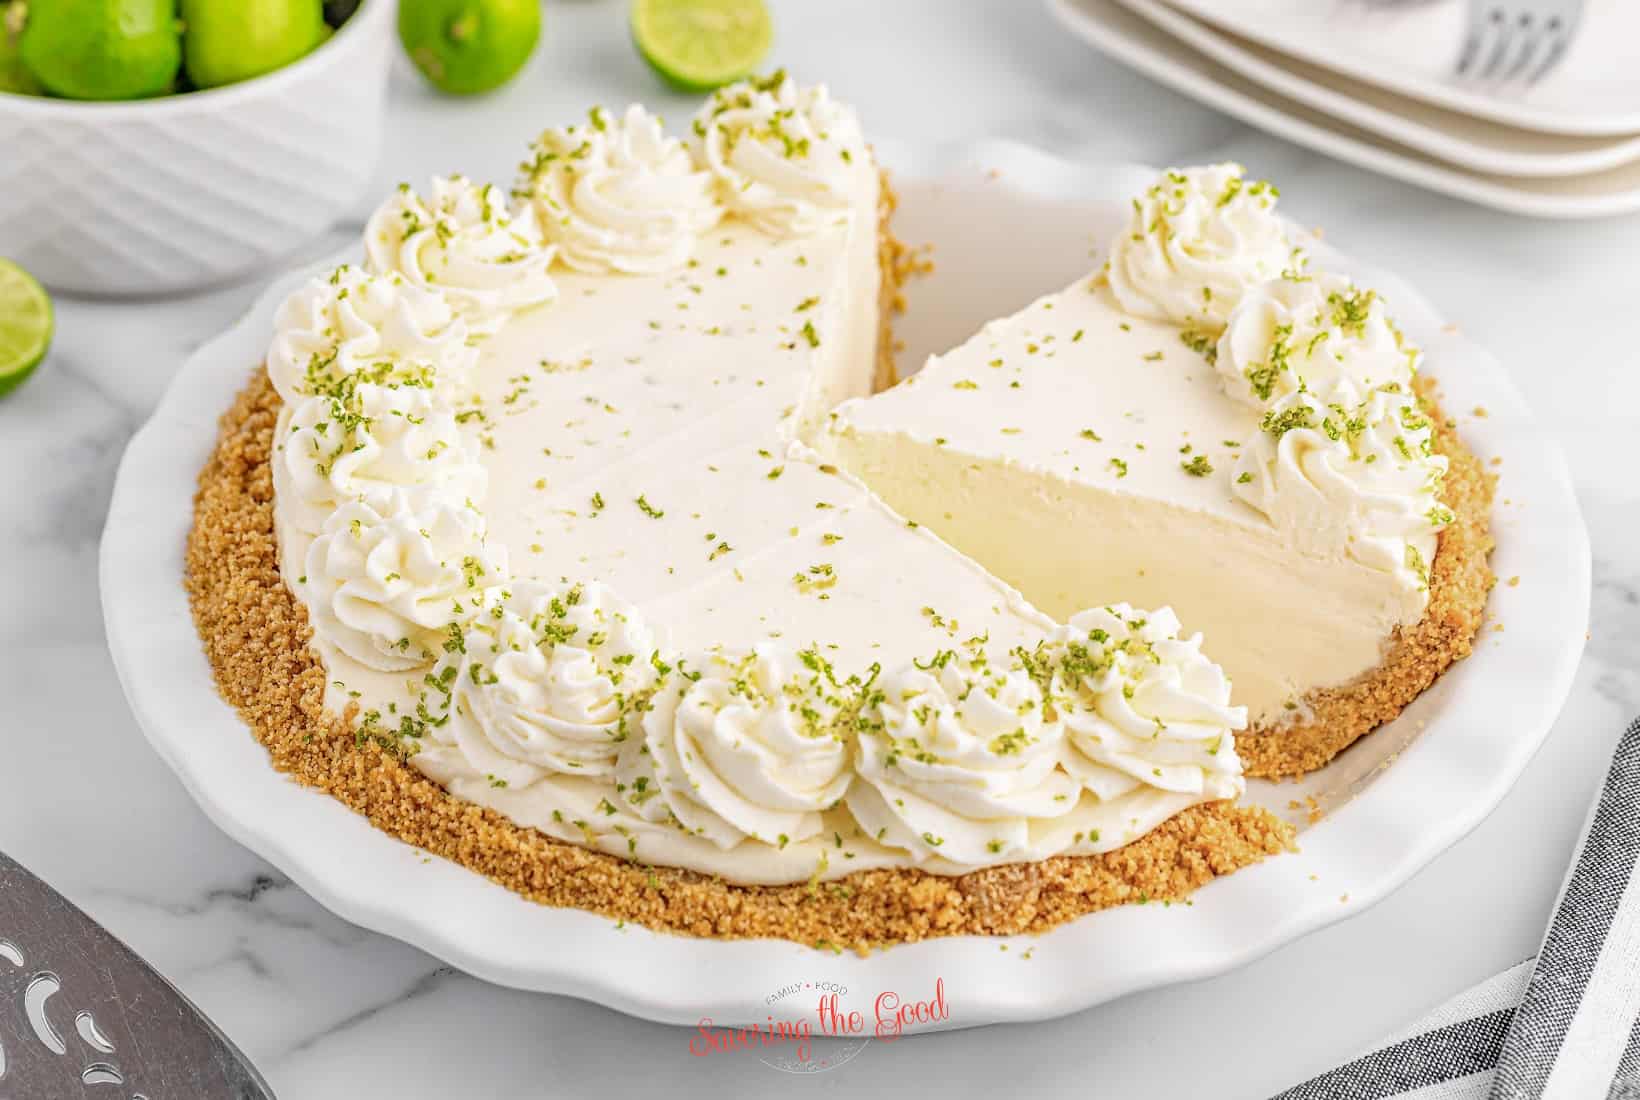 A lime pie with a slice taken out.